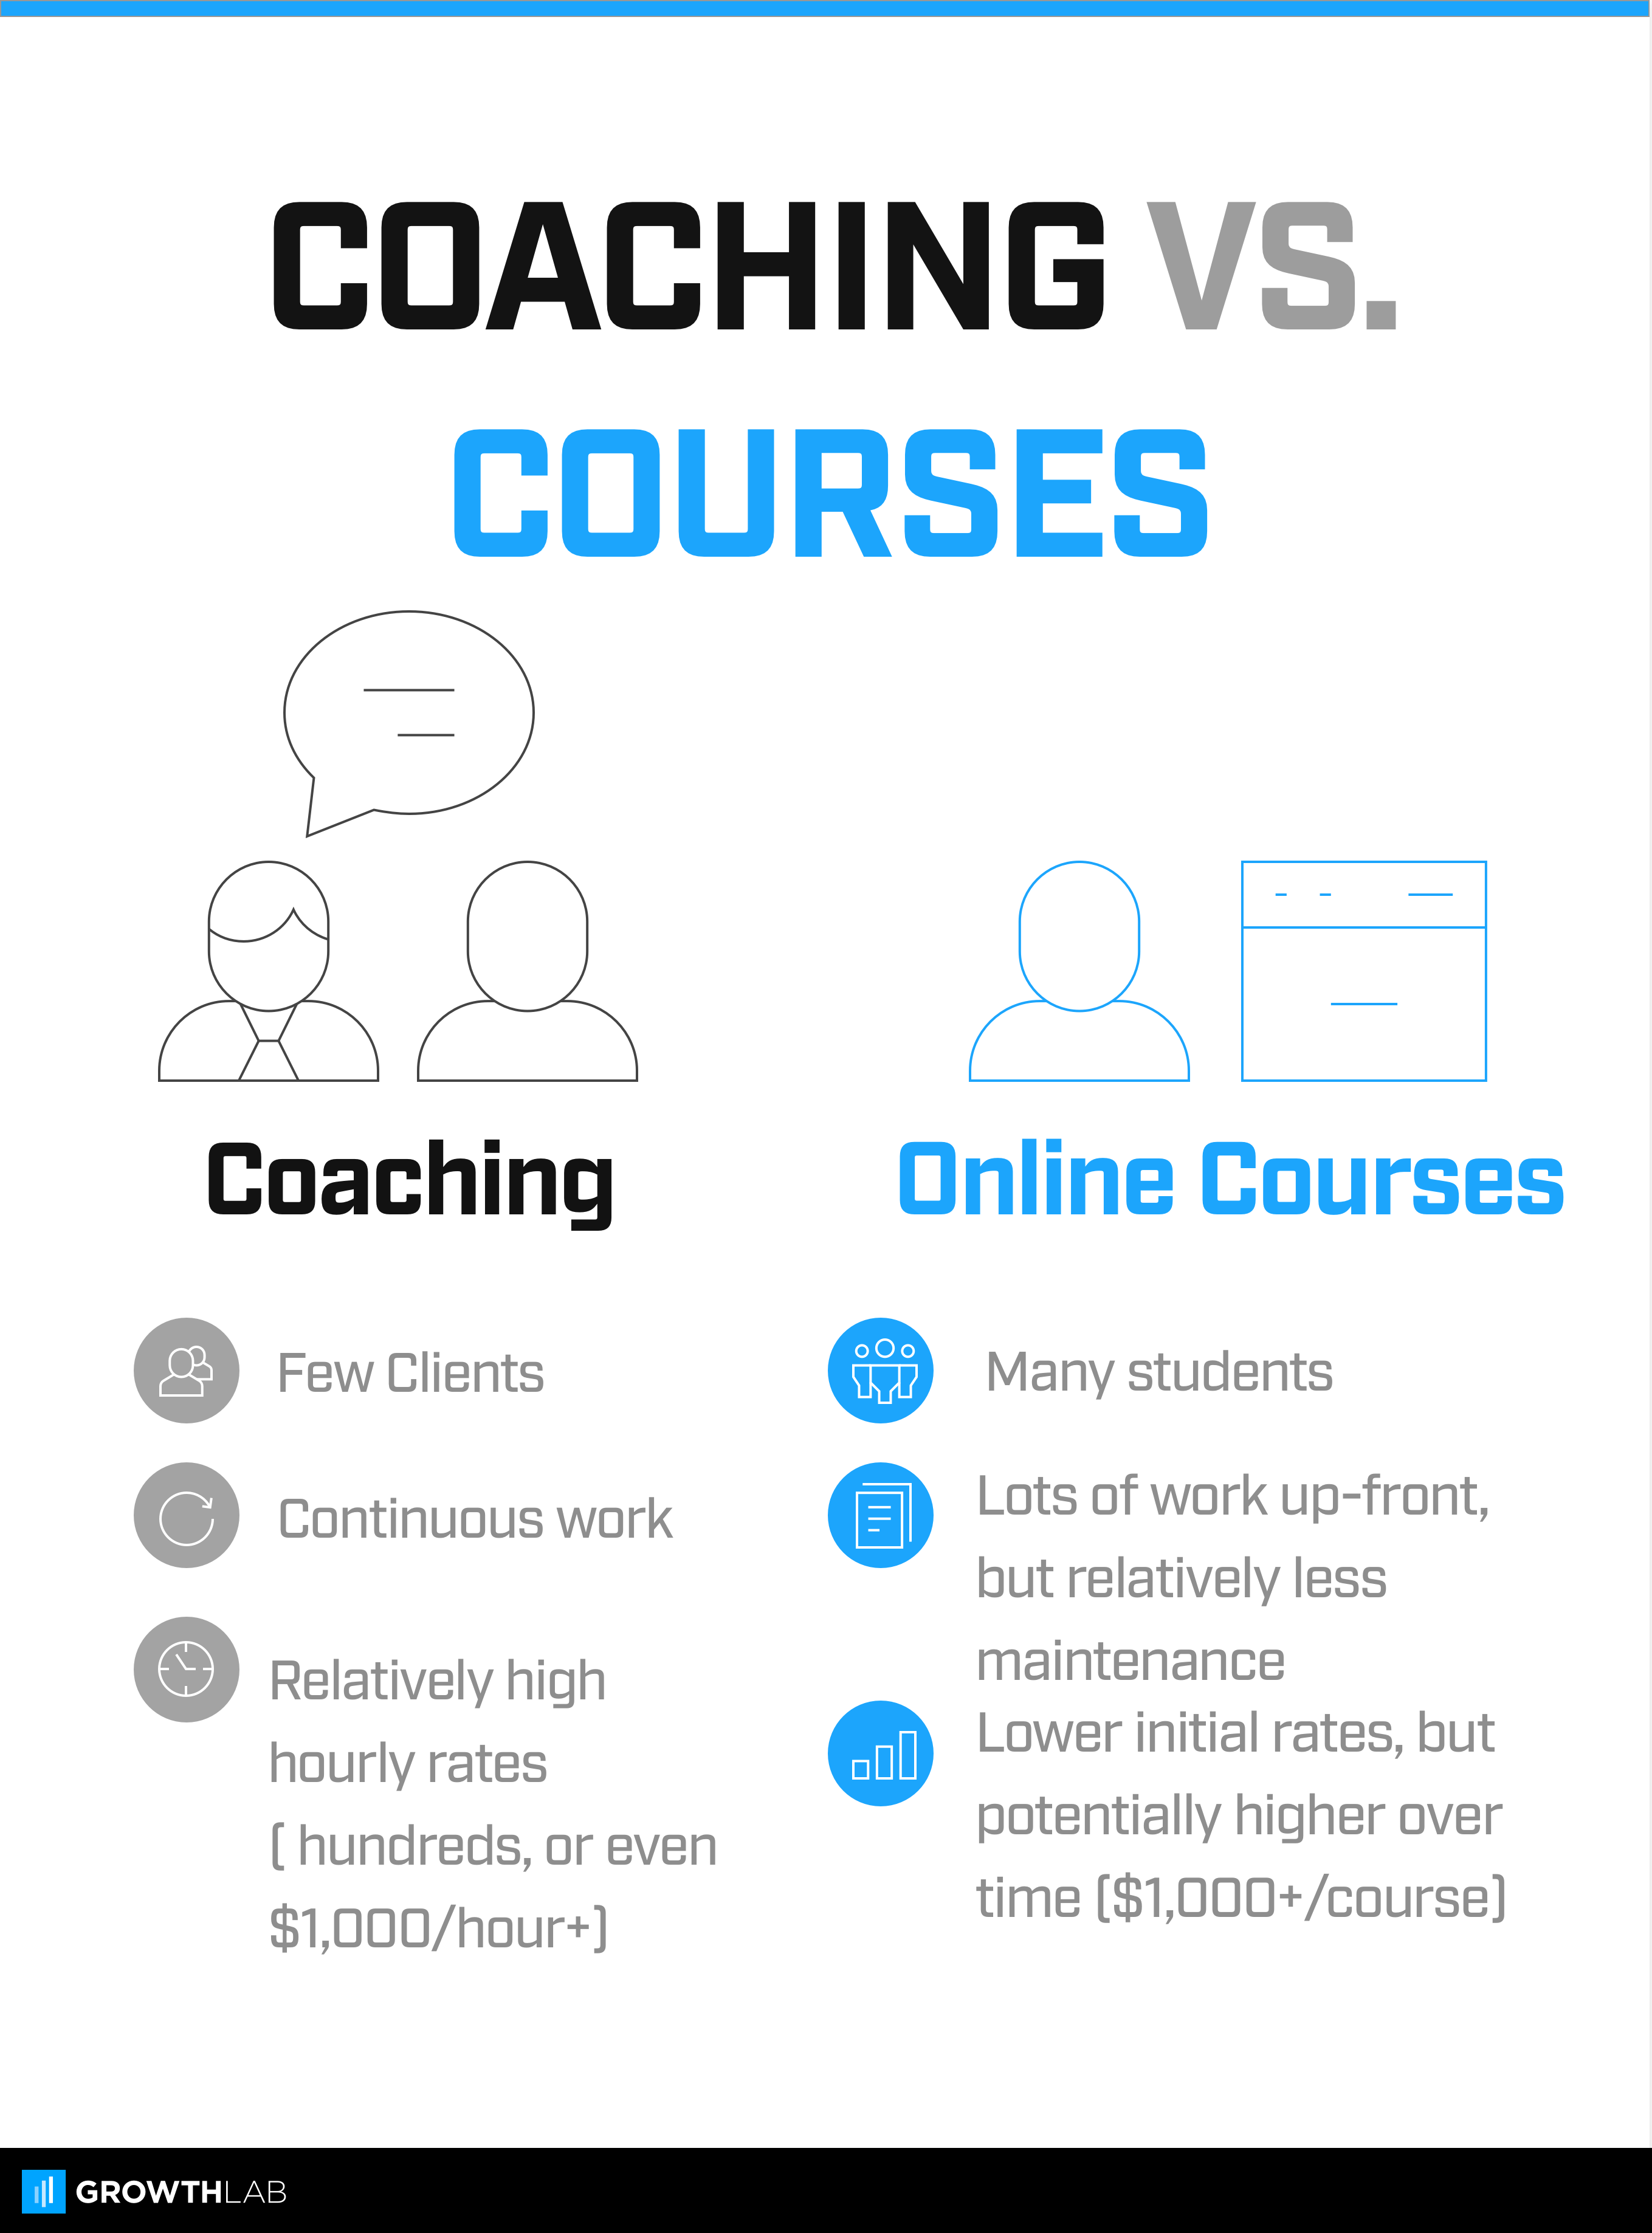 Coaching vs. Online Courses: which online business model is right for you?